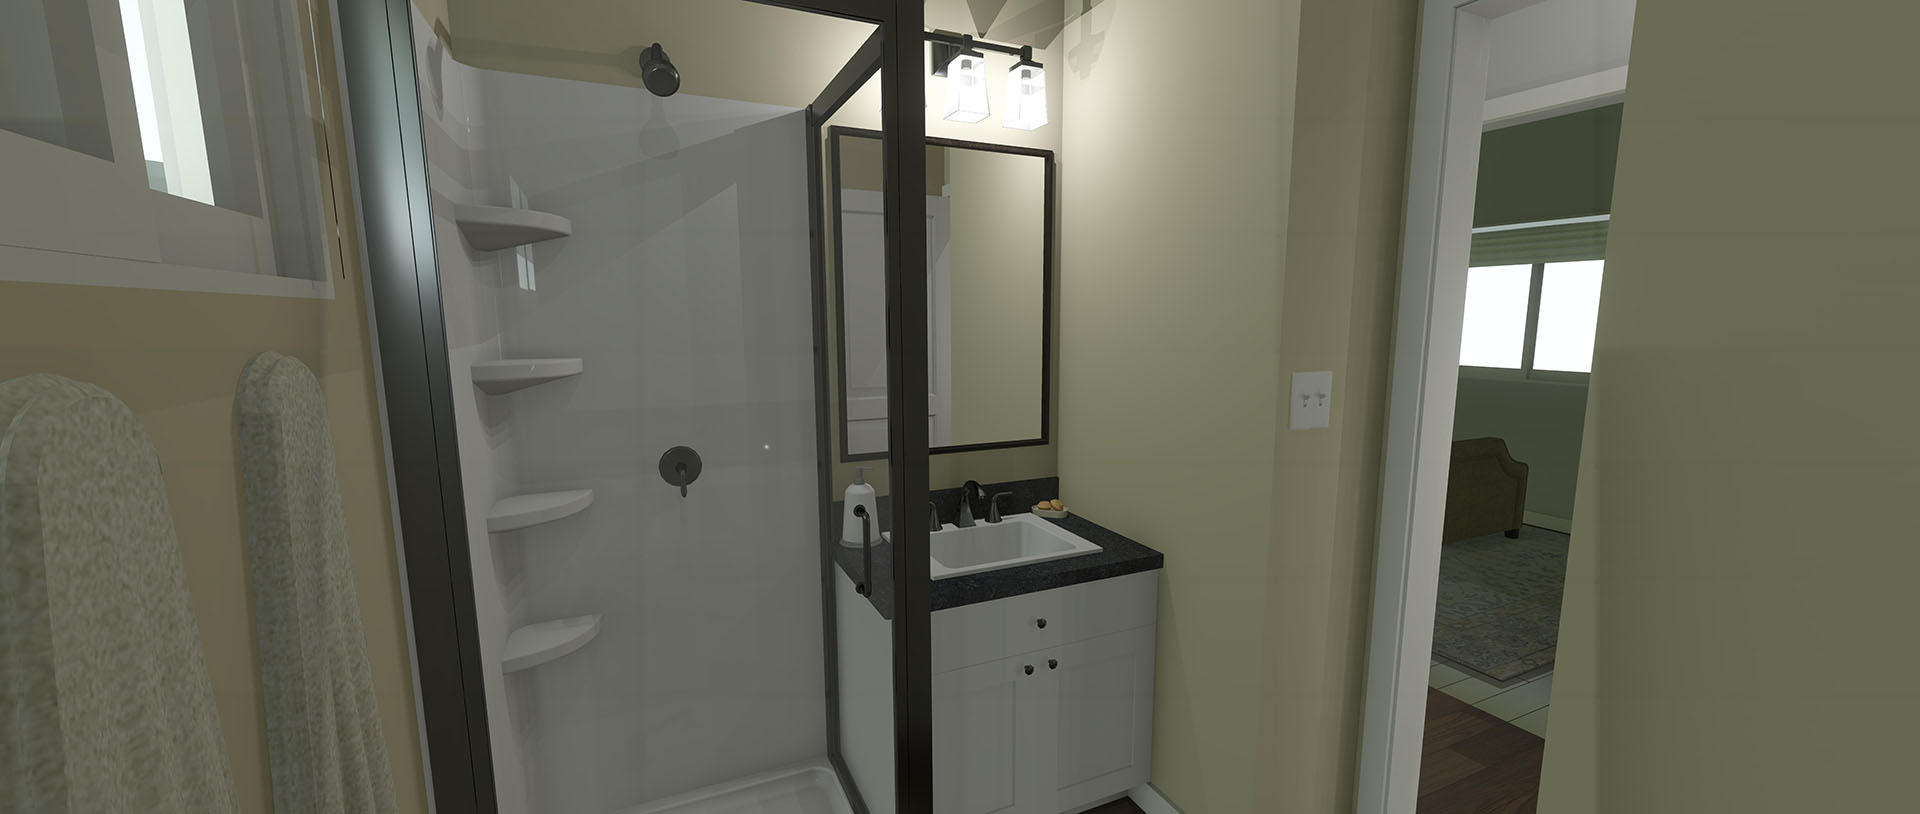 Bathroom with a clear door shower and a sink